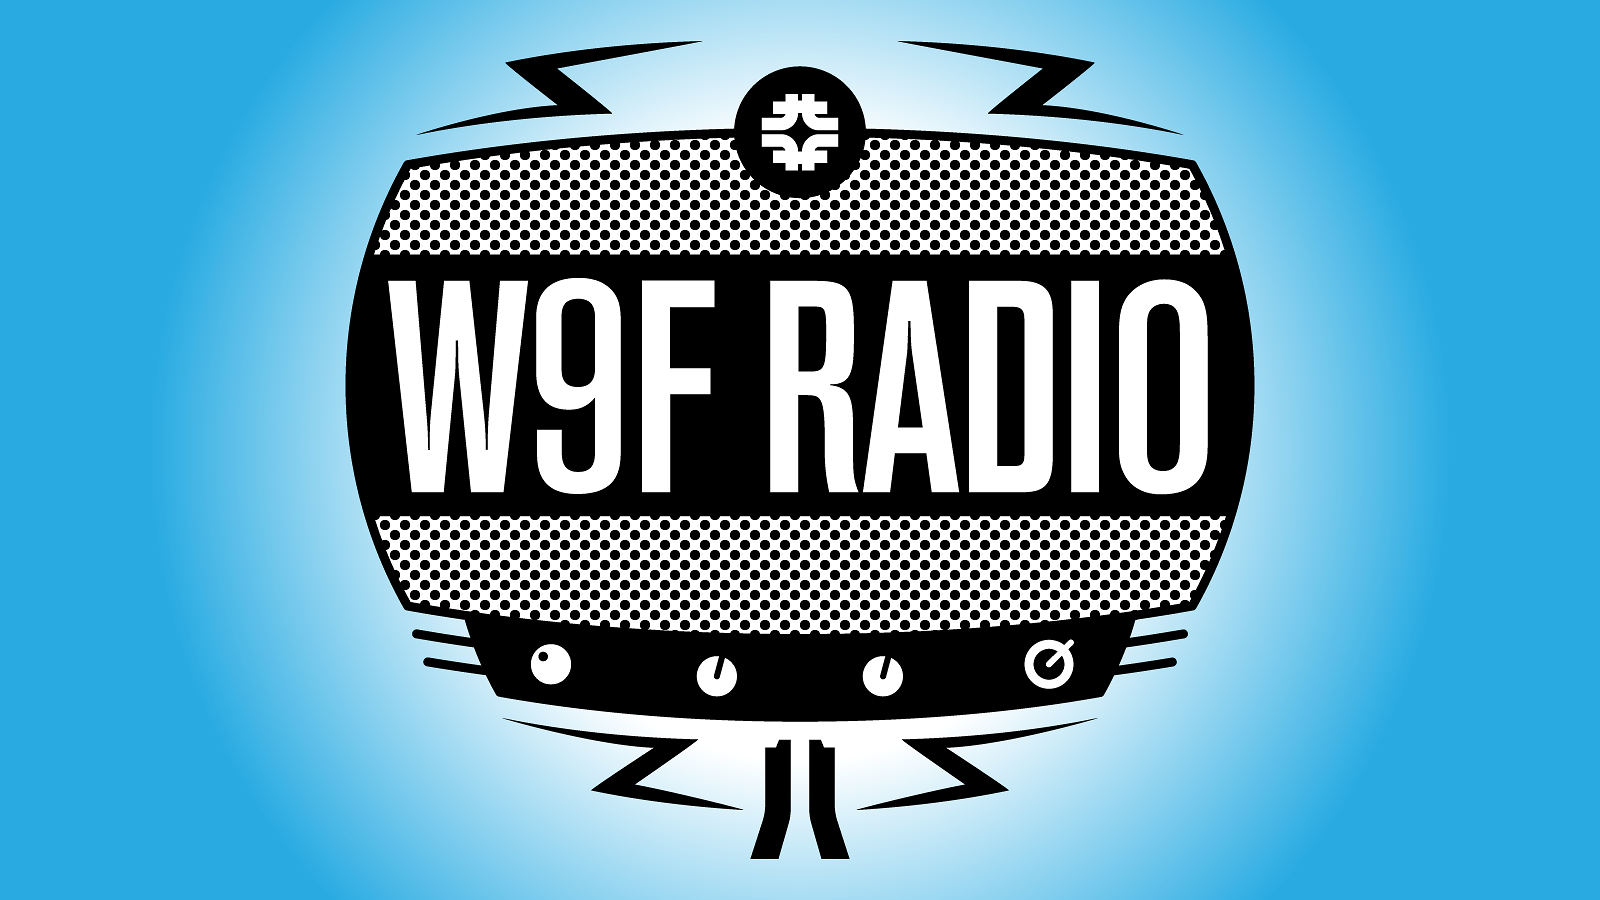 Illustration of black and white W9F RADIO graphic on blue background